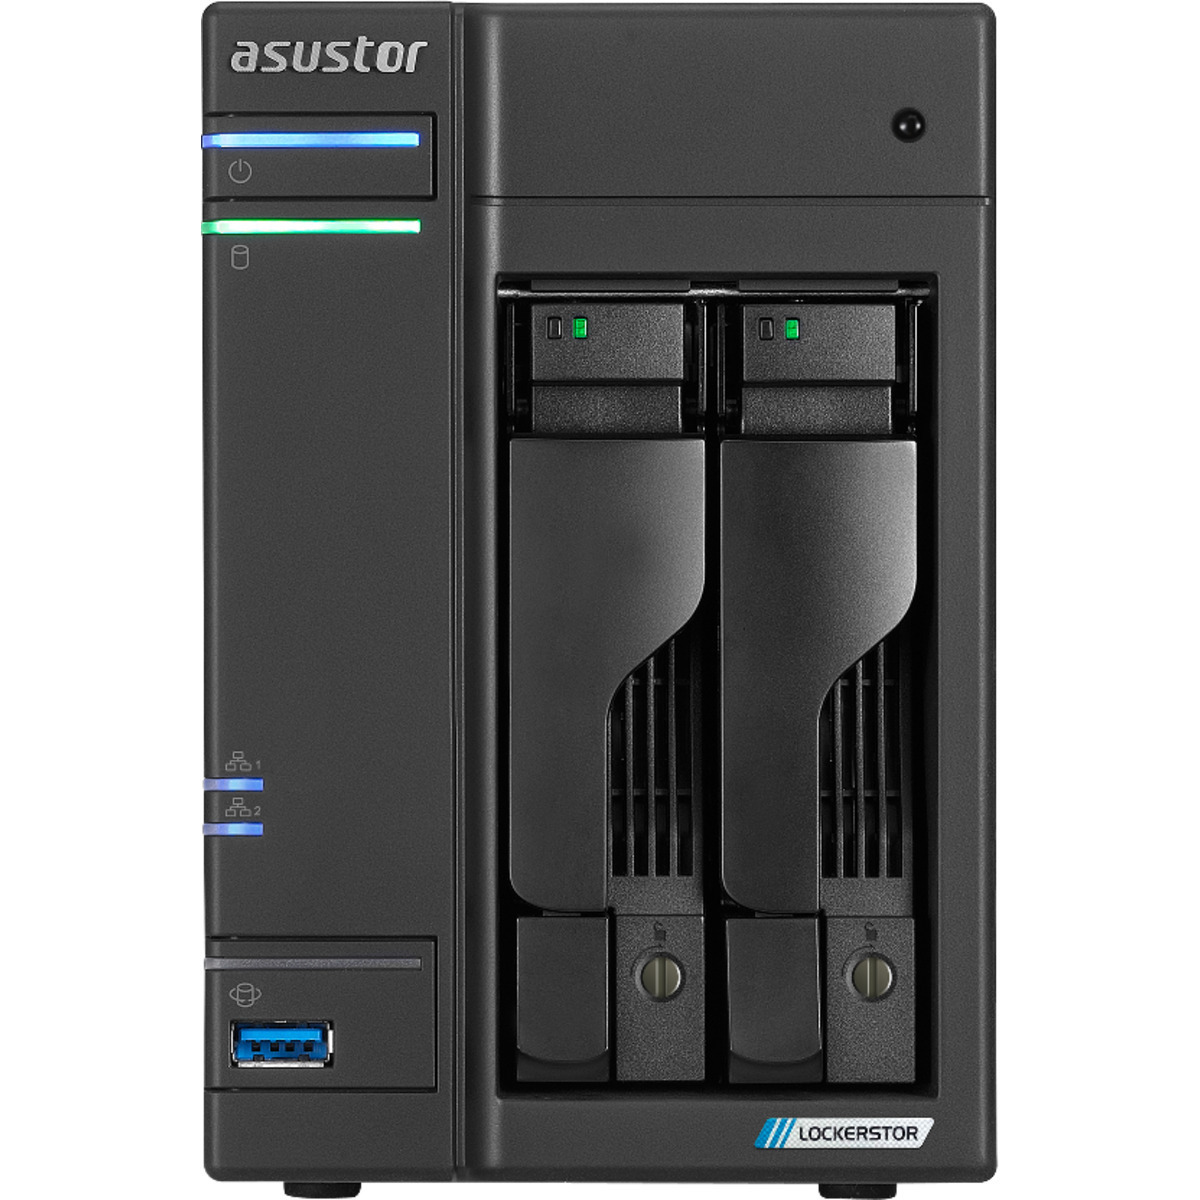 buy $1352 ASUSTOR LOCKERSTOR 2 Gen2 AS6702T 40tb Desktop NAS - Network Attached Storage Device 2x20000gb Seagate EXOS X20 ST20000NM007D 3.5 7200rpm SATA 6Gb/s HDD ENTERPRISE Class Drives Installed - Burn-In Tested - FREE RAM UPGRADE - nas headquarters buy network attached storage server device das new raid-5 free shipping simply usa LOCKERSTOR 2 Gen2 AS6702T